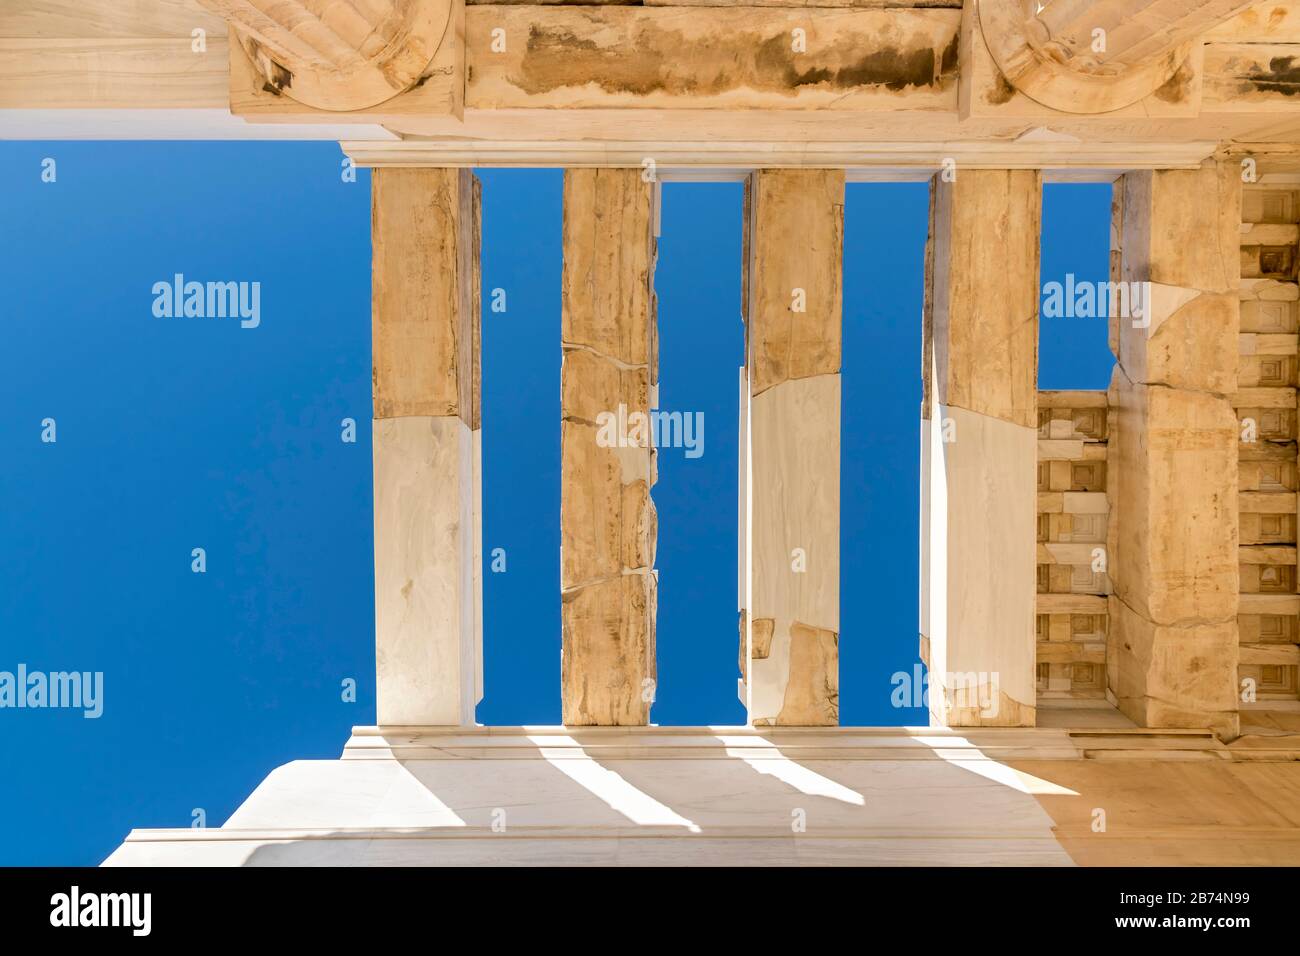 View of Acropolis. Famous place in Athens - capital of Greece. Ancient monuments. Stock Photo